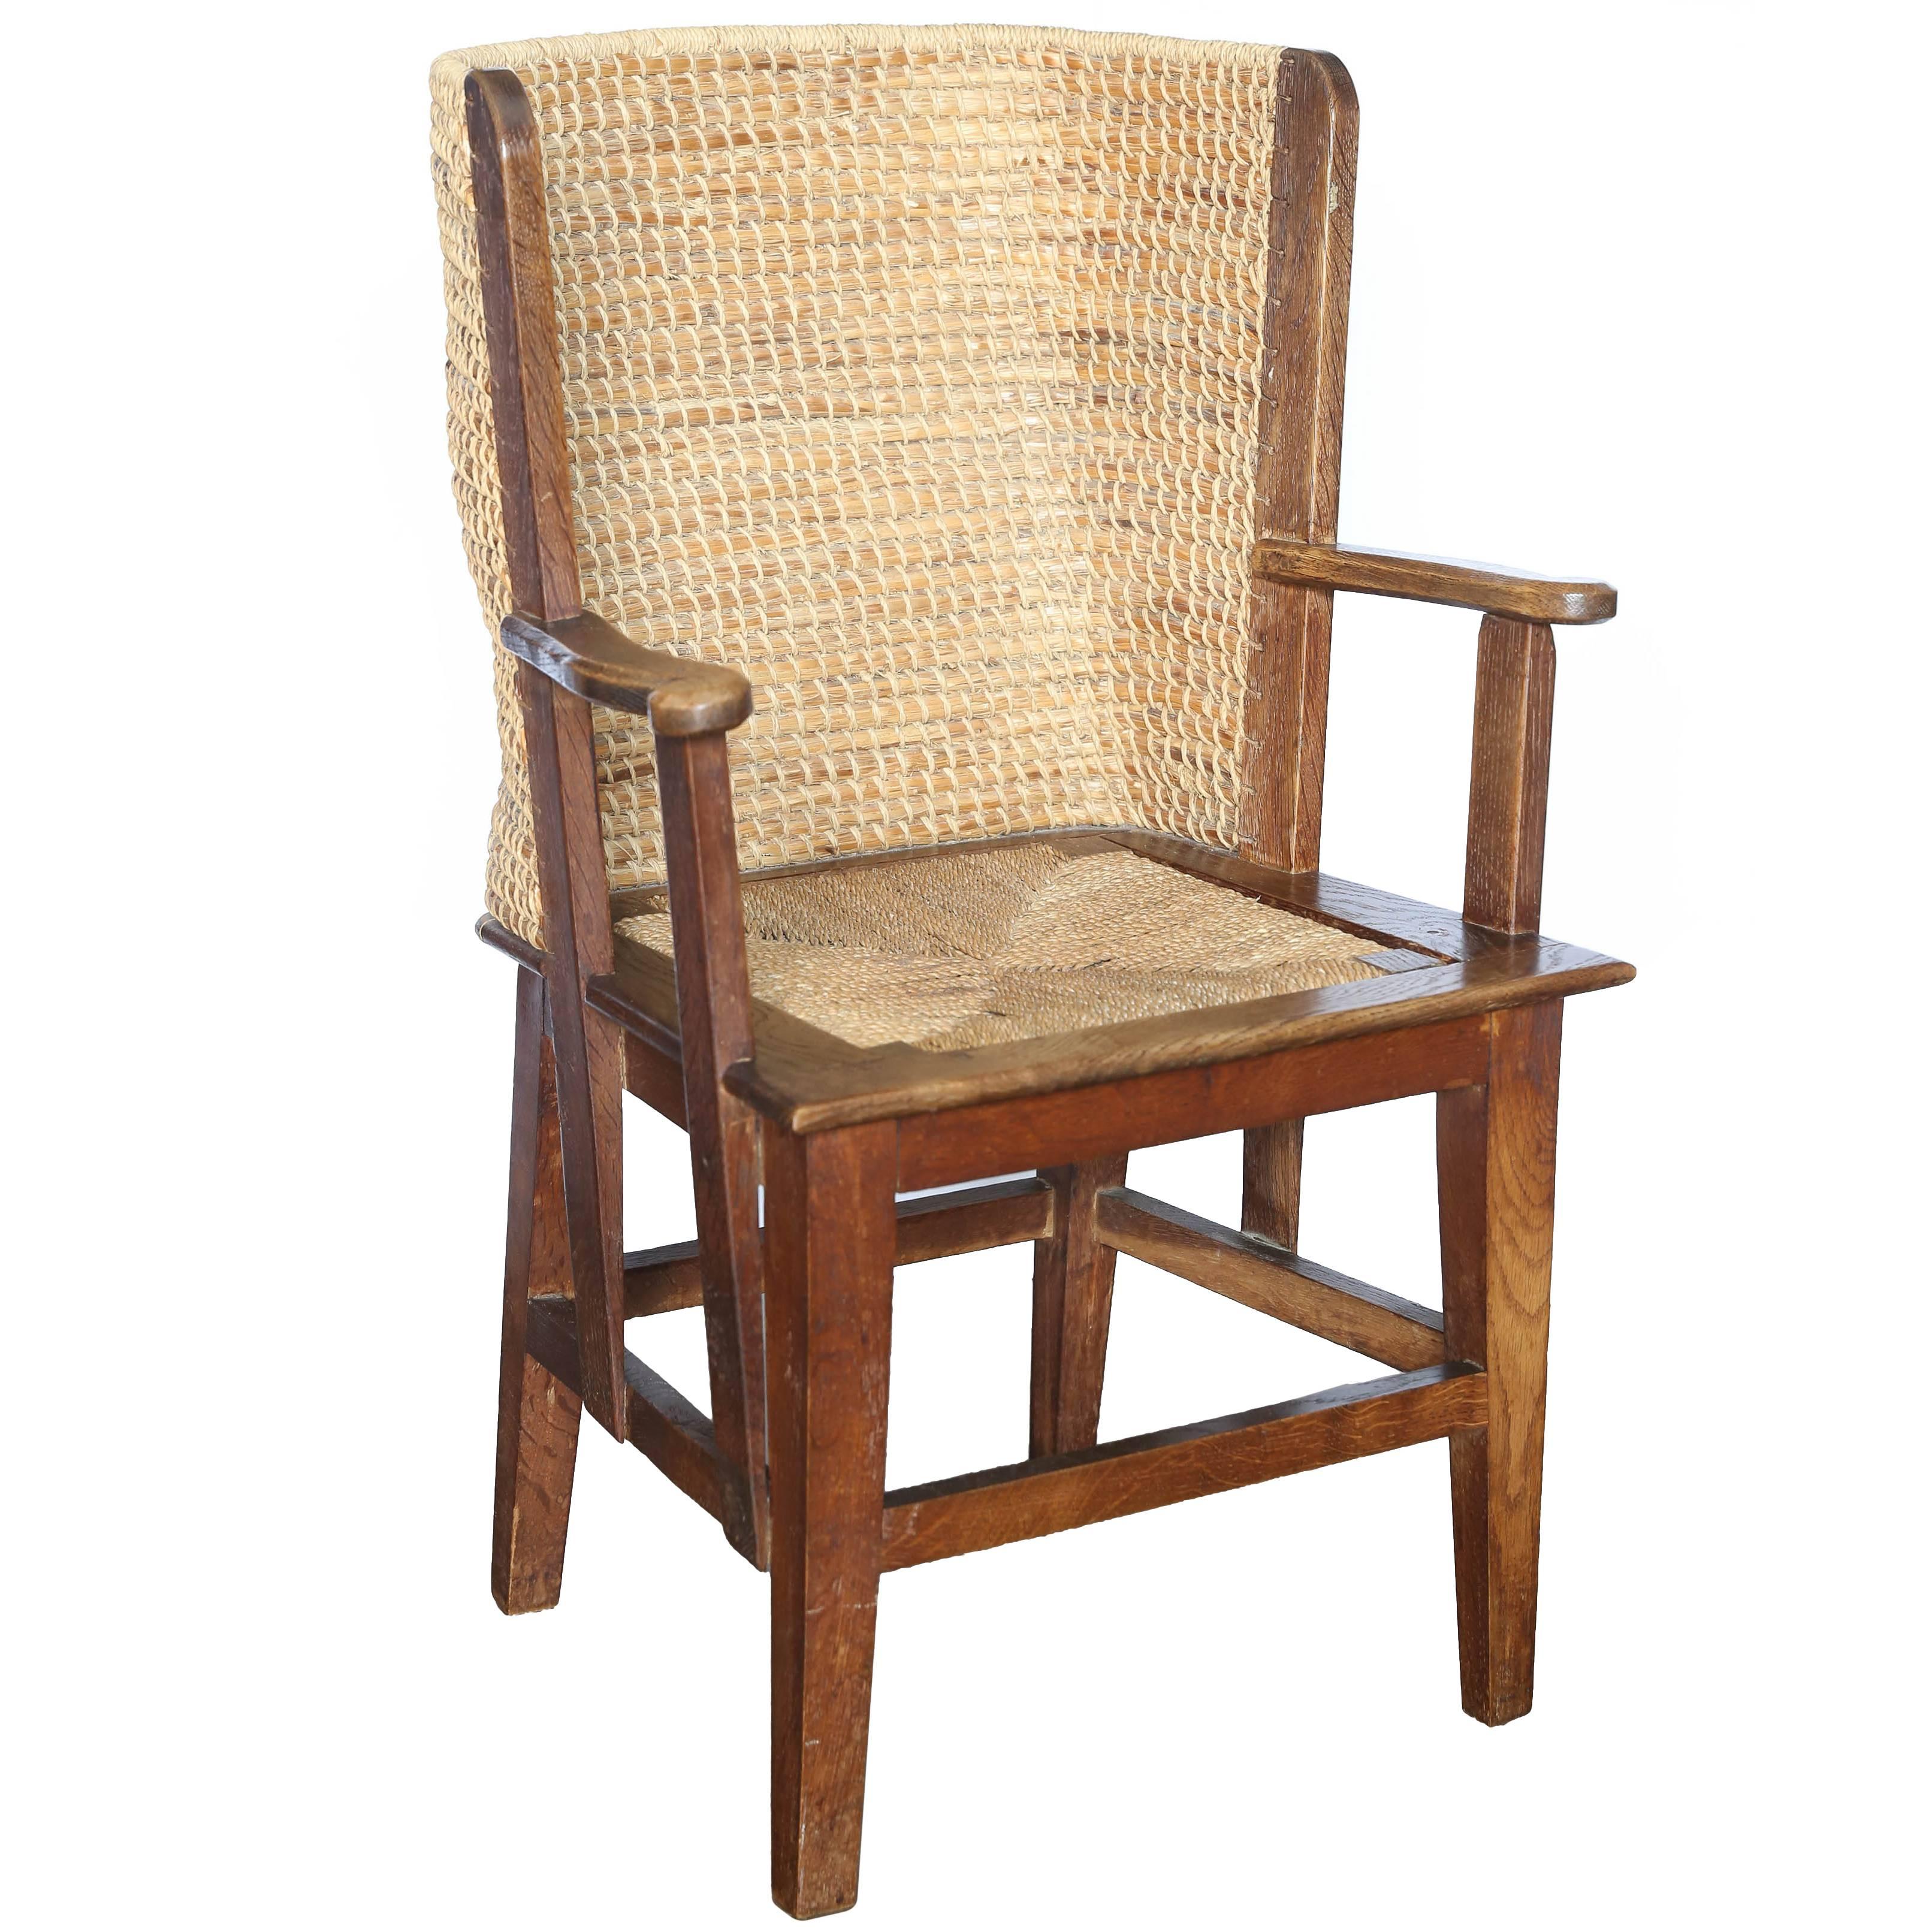 Child's Orkney Chair with Woven Reed Back